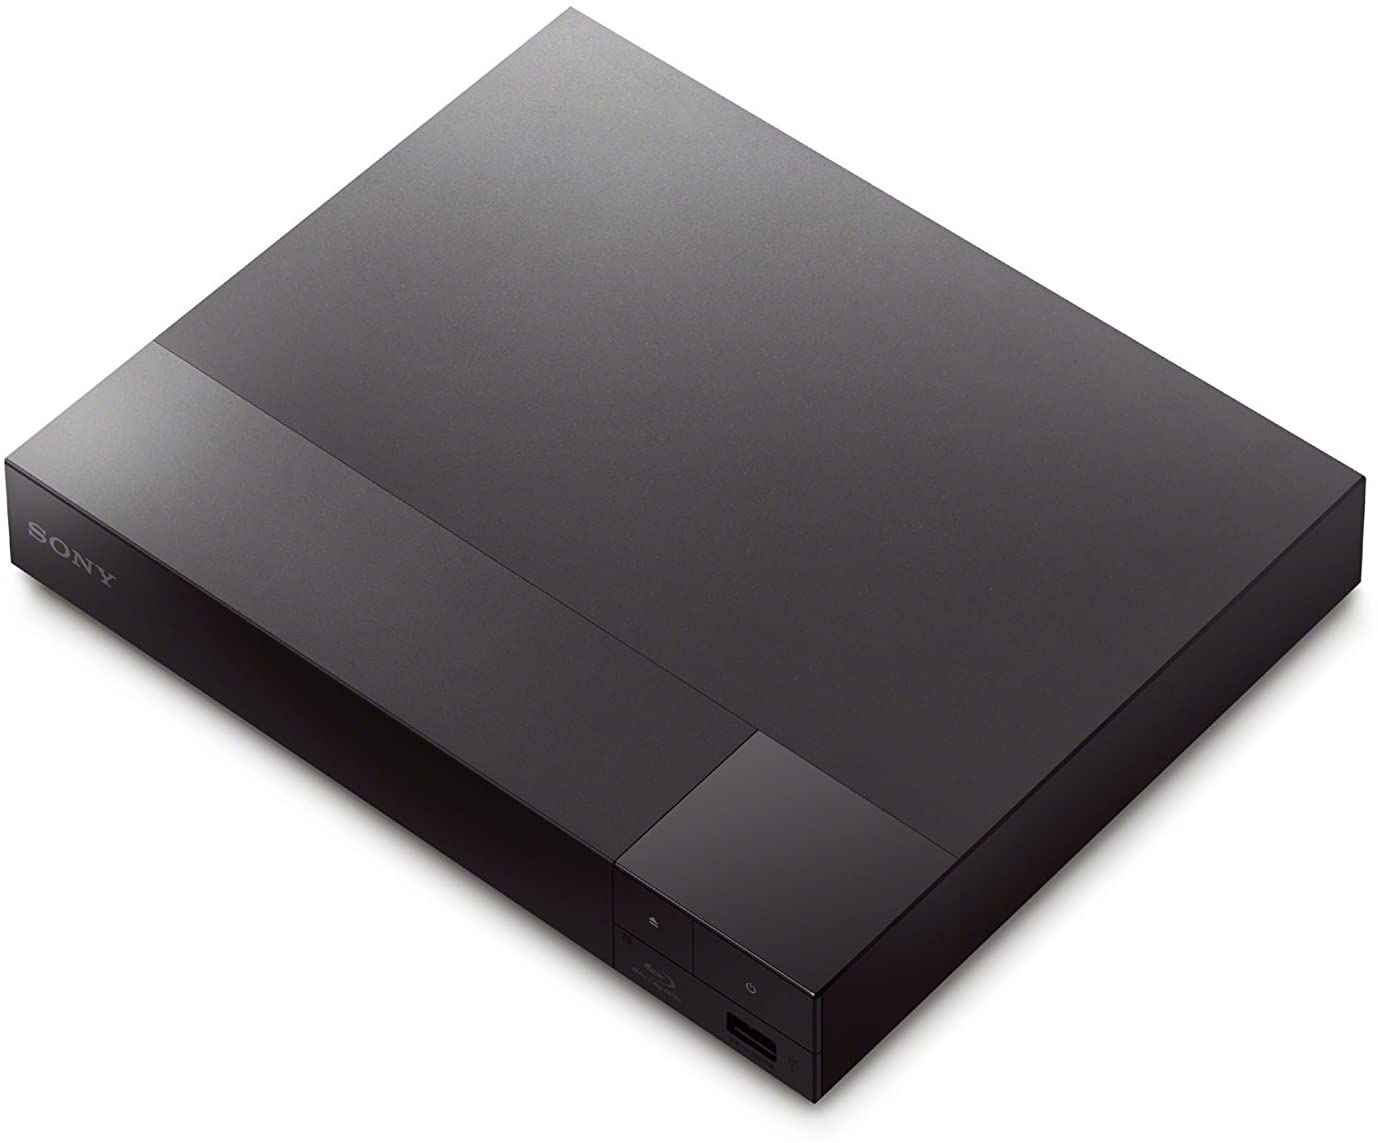 Sony BDP-BX370 Blu-ray Disc Player with Wi-Fi